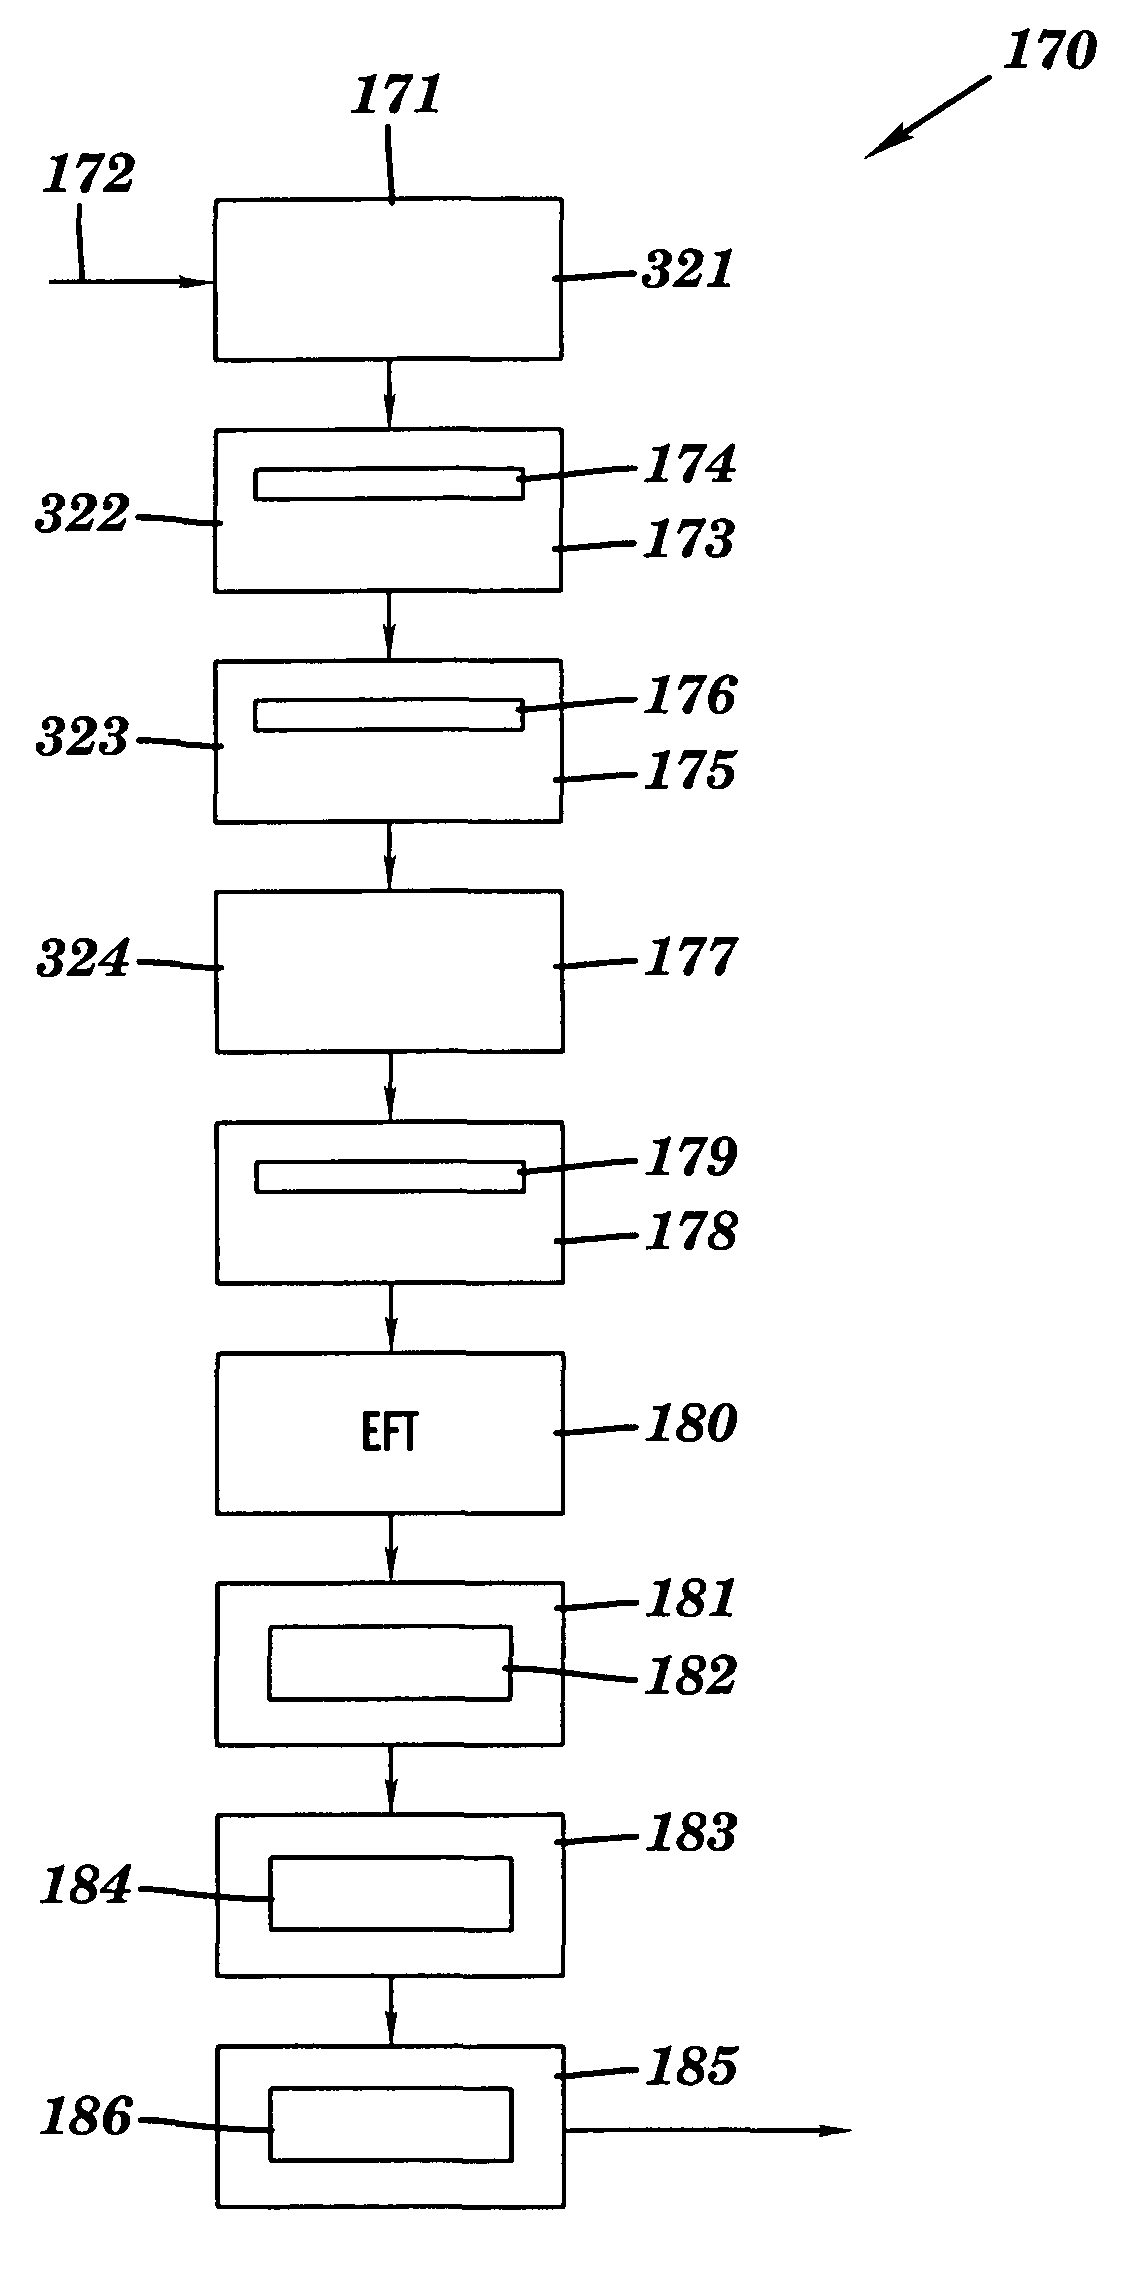 Intelligent apparatus, system and method for financial data computation, report remittance and funds transfer over an interactive communications network